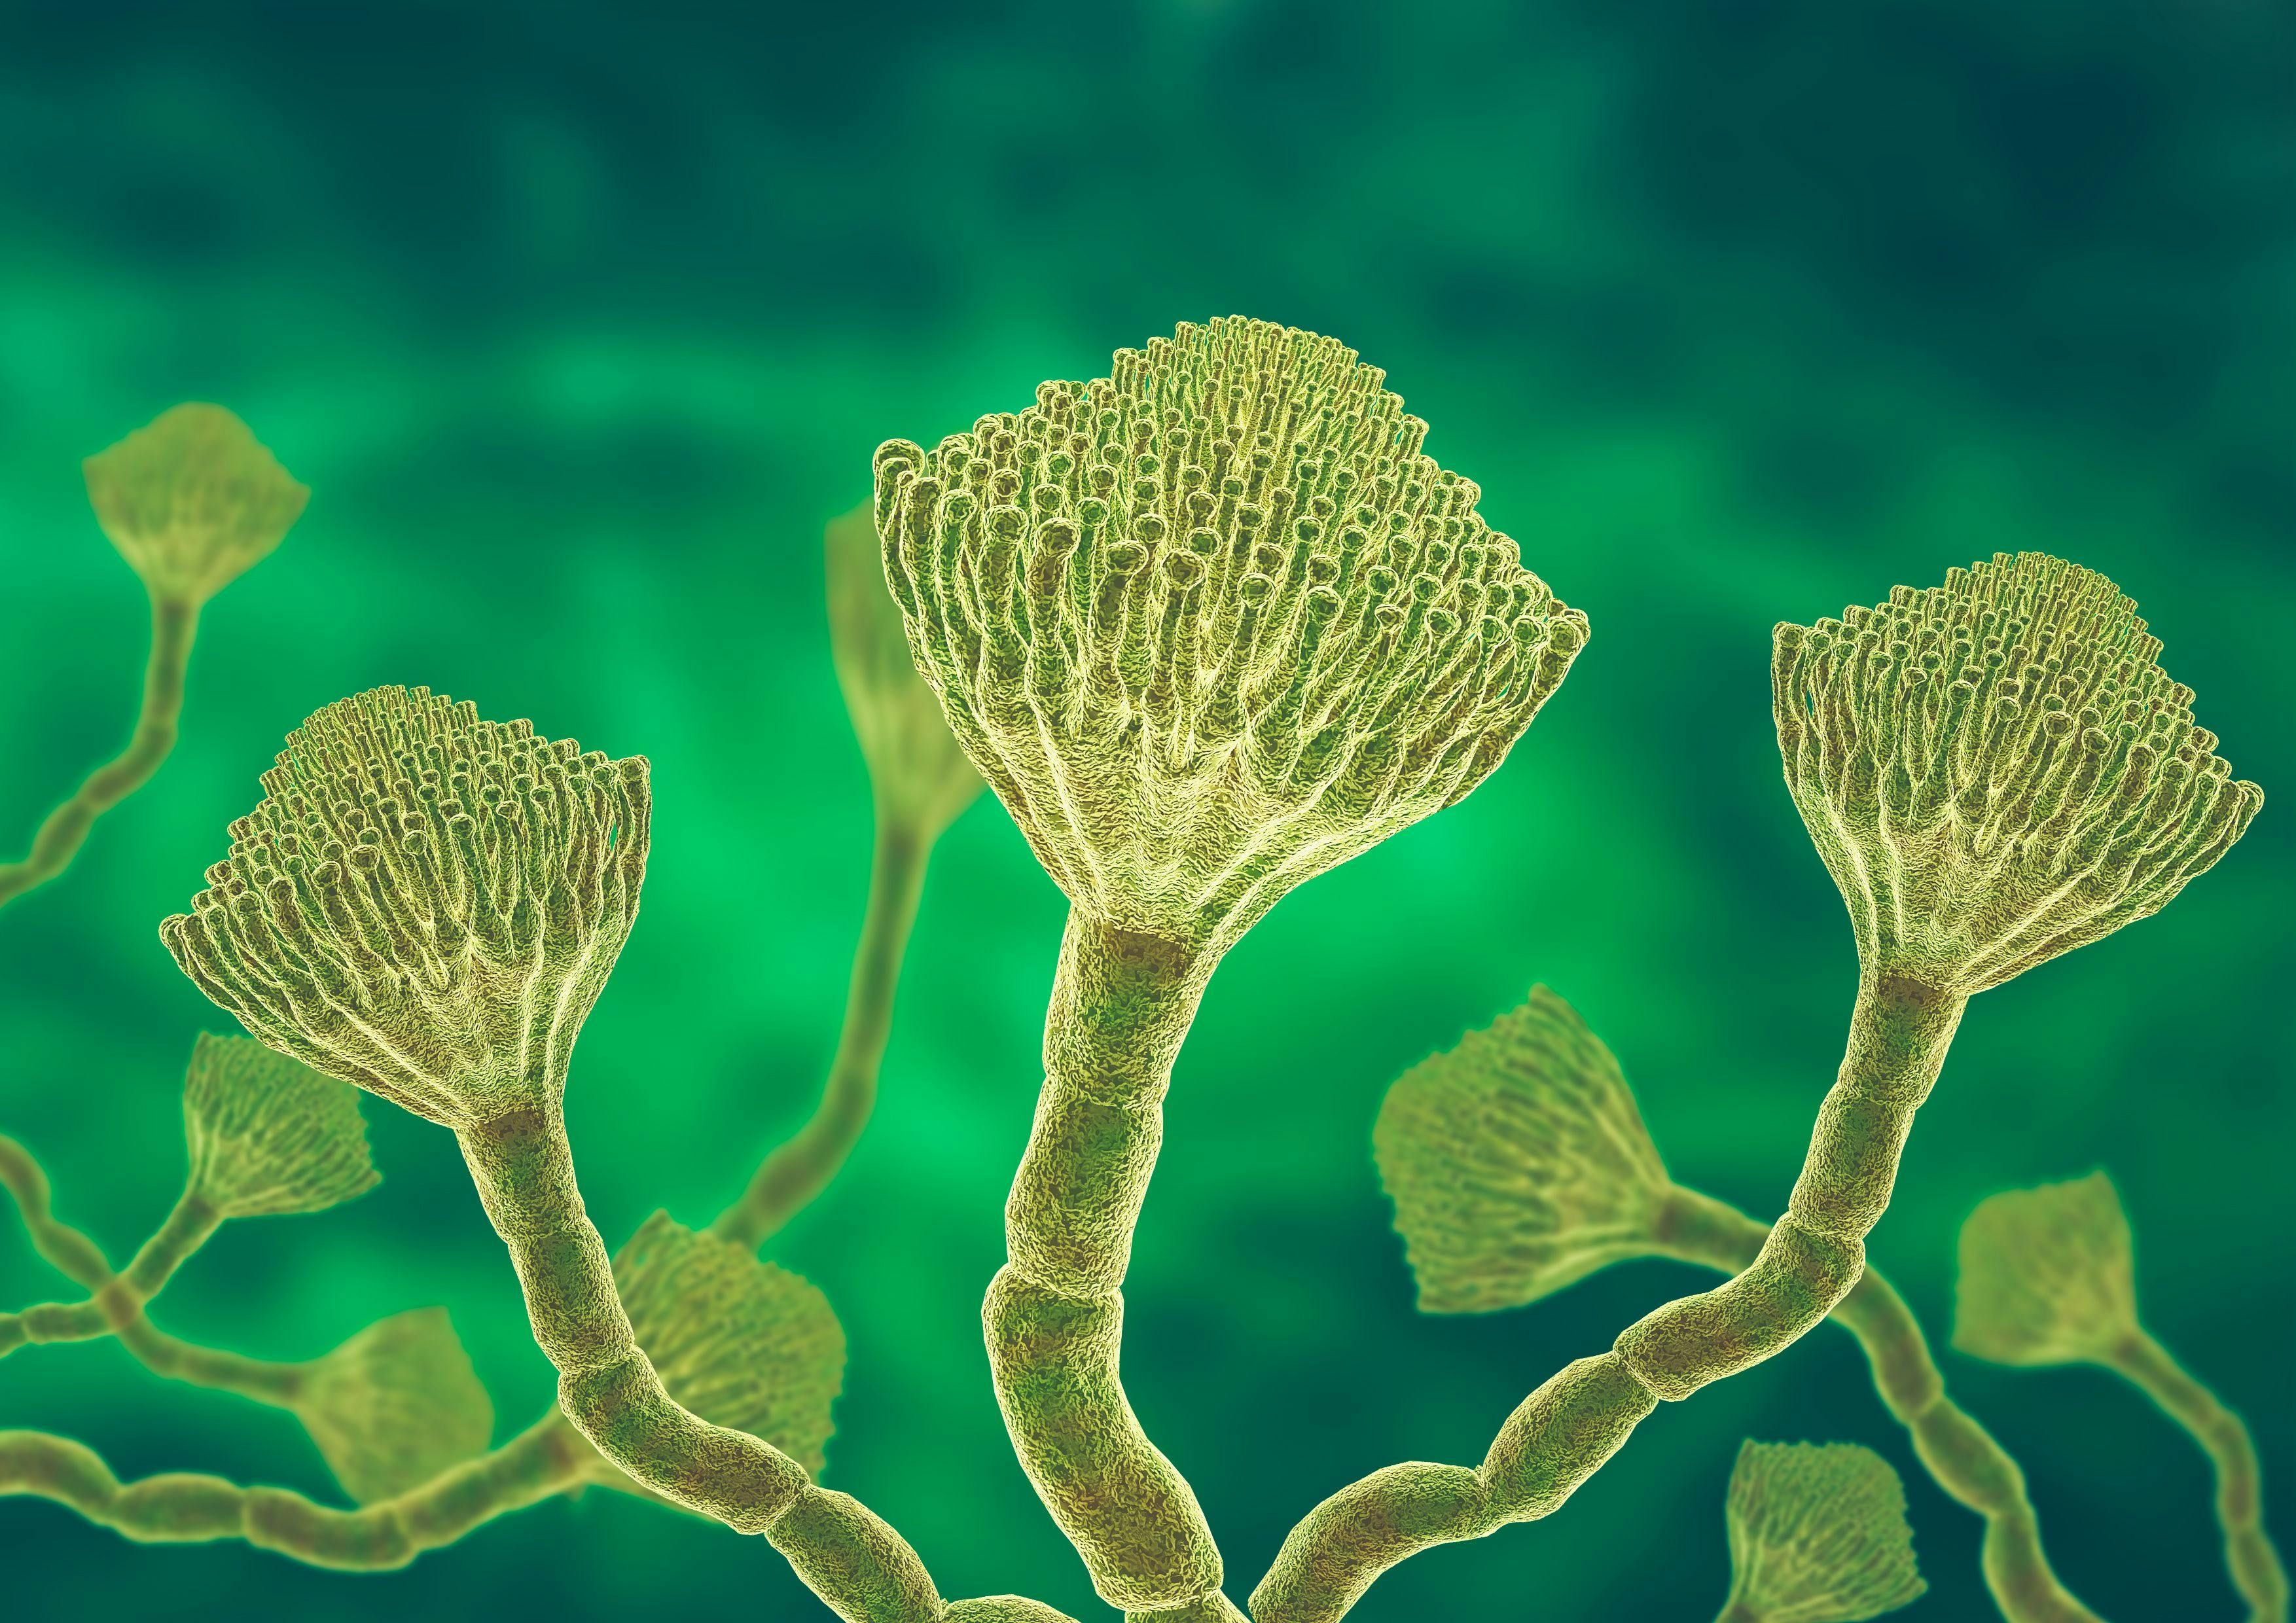 Microscopic view of a colony of Aspergillus fungi, which causes the lung infection aspergillosis, aspergilloma of the brain and lungs - Image credit: AGPhotography | stock.adobe.com